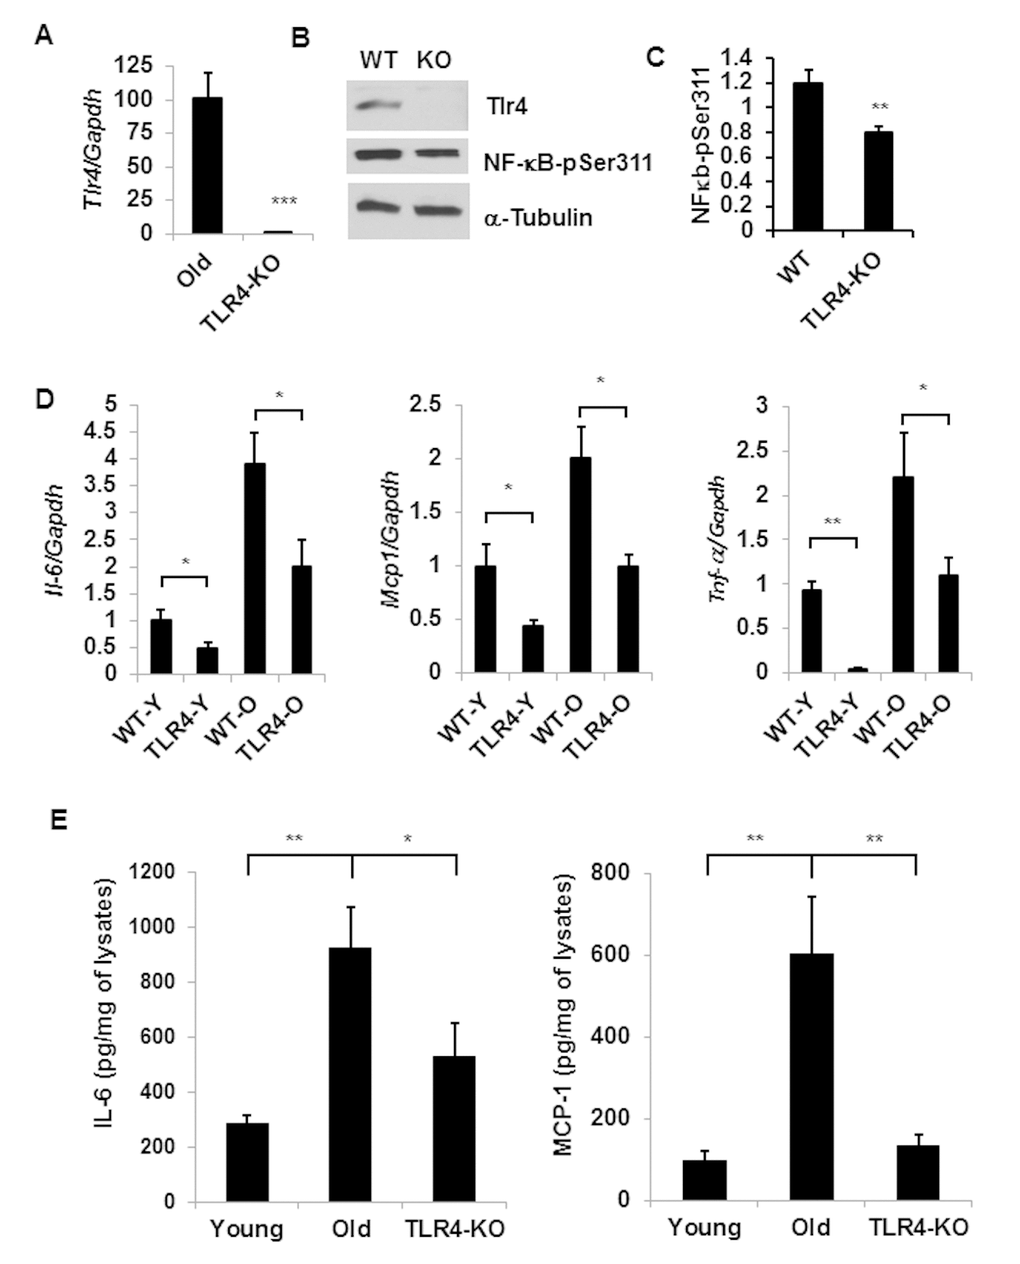 TLR-4 mutant old mice are protected from adipose tissue inflammation. Expression of Tlr4 gene products: mRNA (A) and protein (B) levels together with NF-κB activation by using a phospho-NF-κB p65 pSer311 antibody in western blotting analysis. The relative protein density is expressed in (C). (D) Expression profile of pro-inflammatory cytokine genes (Il-6, Mcp1 and Tnf-a) in the adipose tissue of young or old of both WT and TLR4 deficient mice. (E) The protein product of IL-6 and MCP1 in the SVF lysates derived from the adipose tissues of young WT and old WT or old TLR4 deficient mice. Data represented in bar diagrams are mean + SD value of relative mRNA expression from three independent experiments where total RNA was extracted from gonadal fat pads of young (n=5) and old (n=5) mice. Data presented here are representative images of three independent experiments. The significance levels *pp